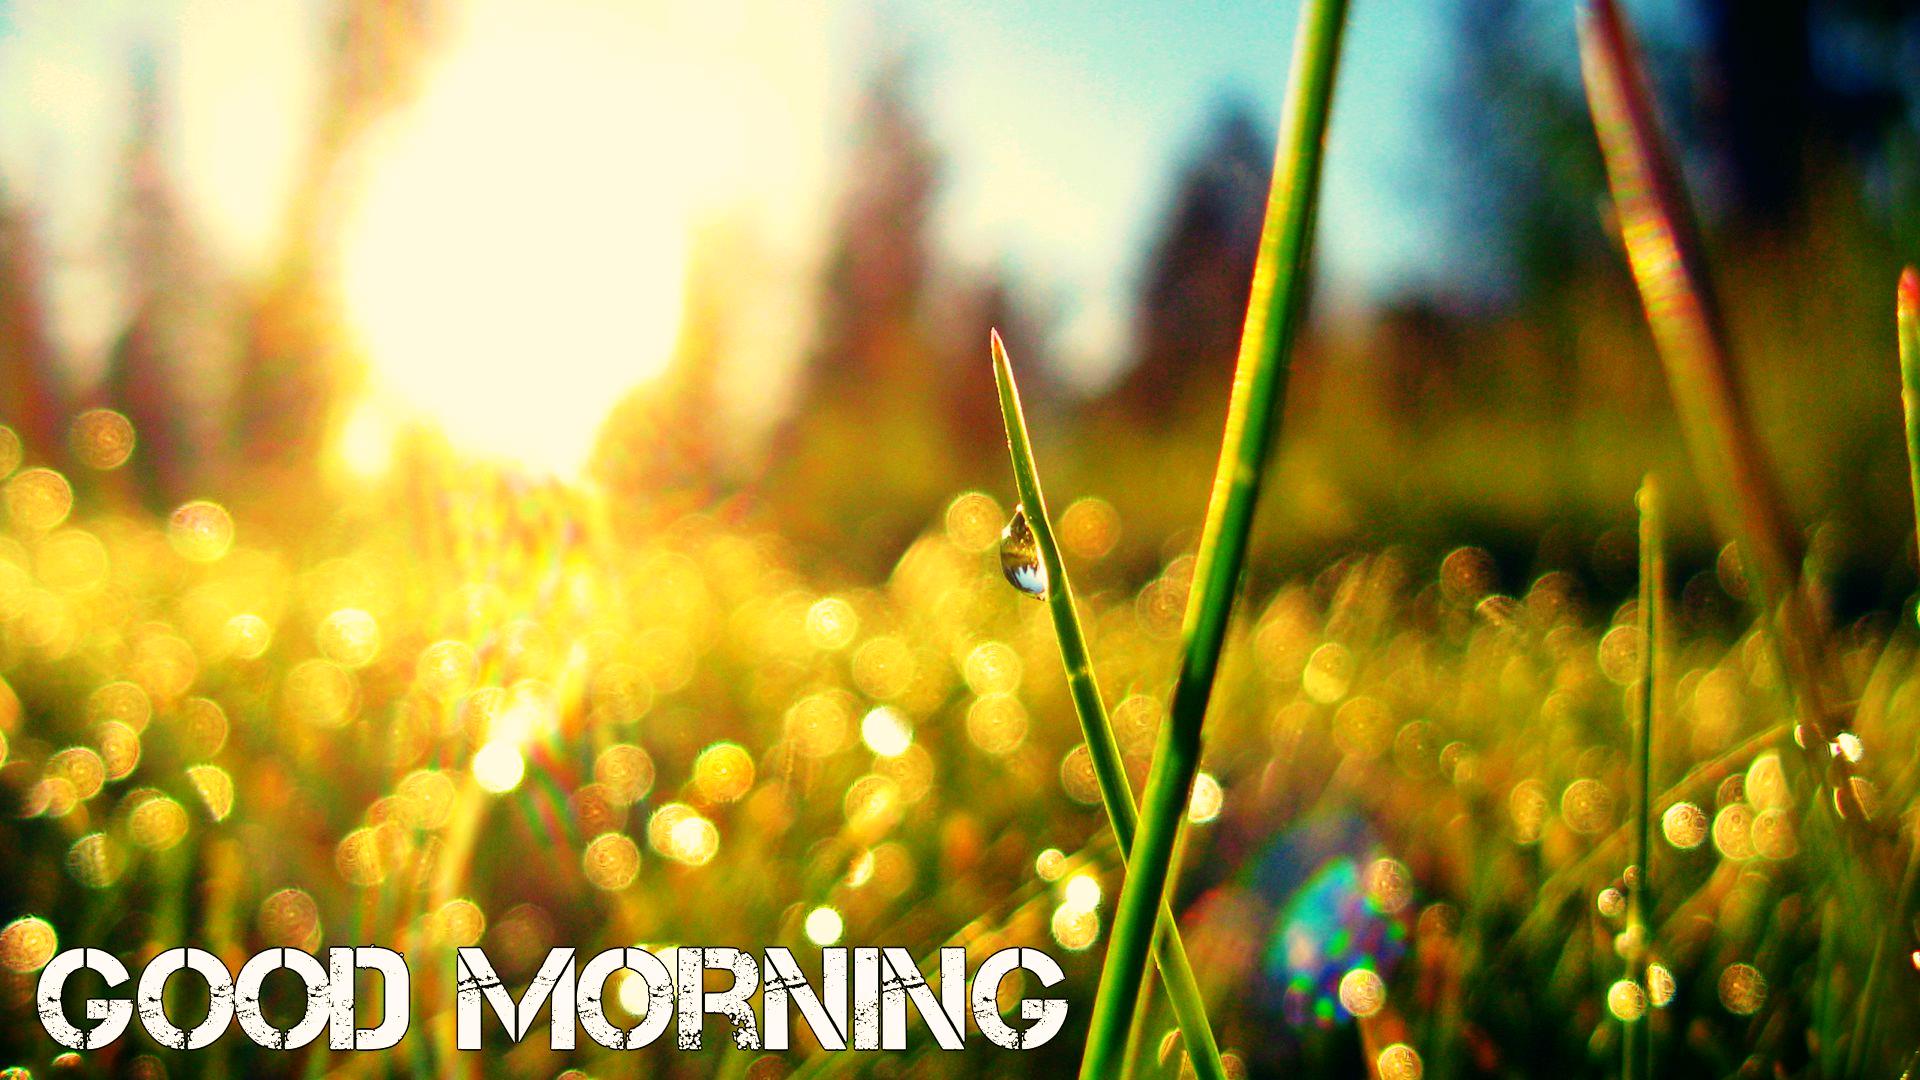 HD Good Morning Wallpapers Free Download  Let Us Publish